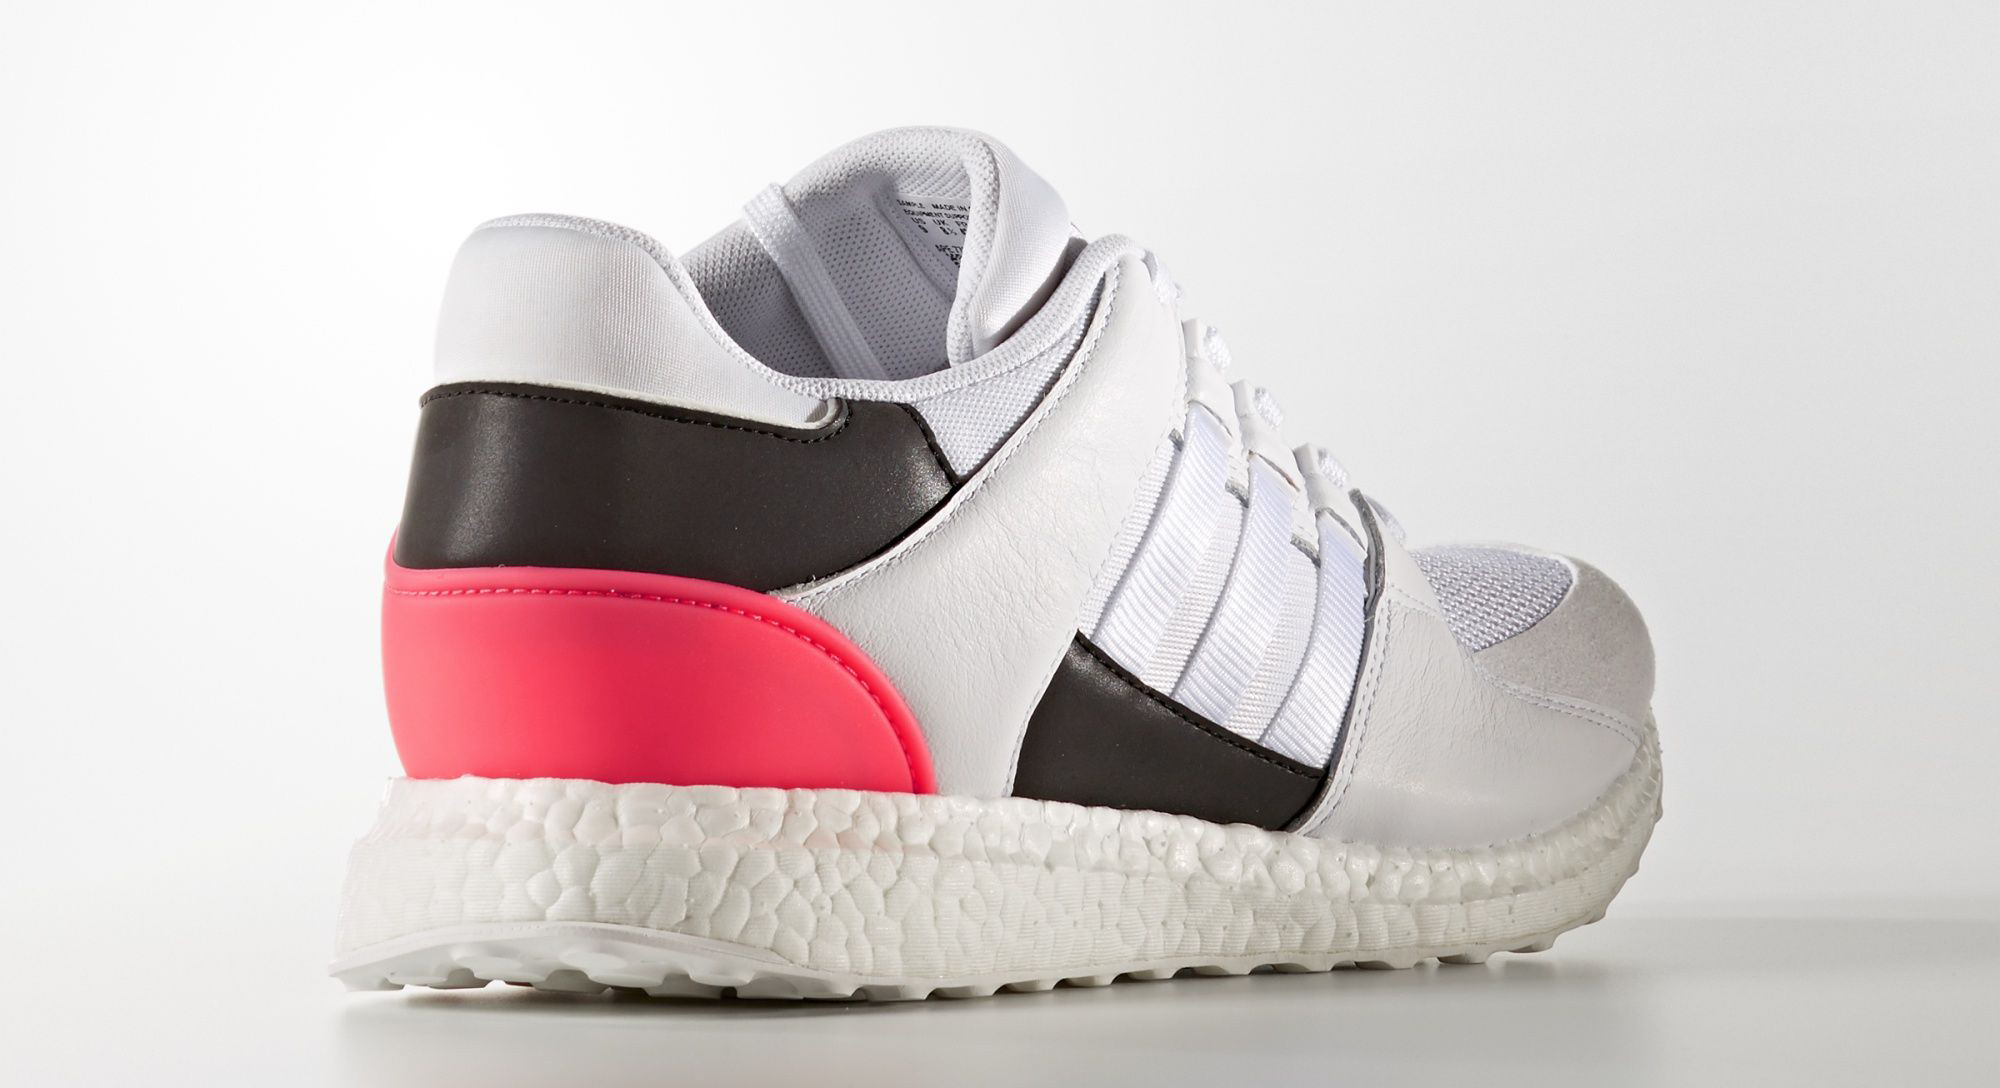 adidas-eqt-support-ultra-boost-white-turbo-red-1